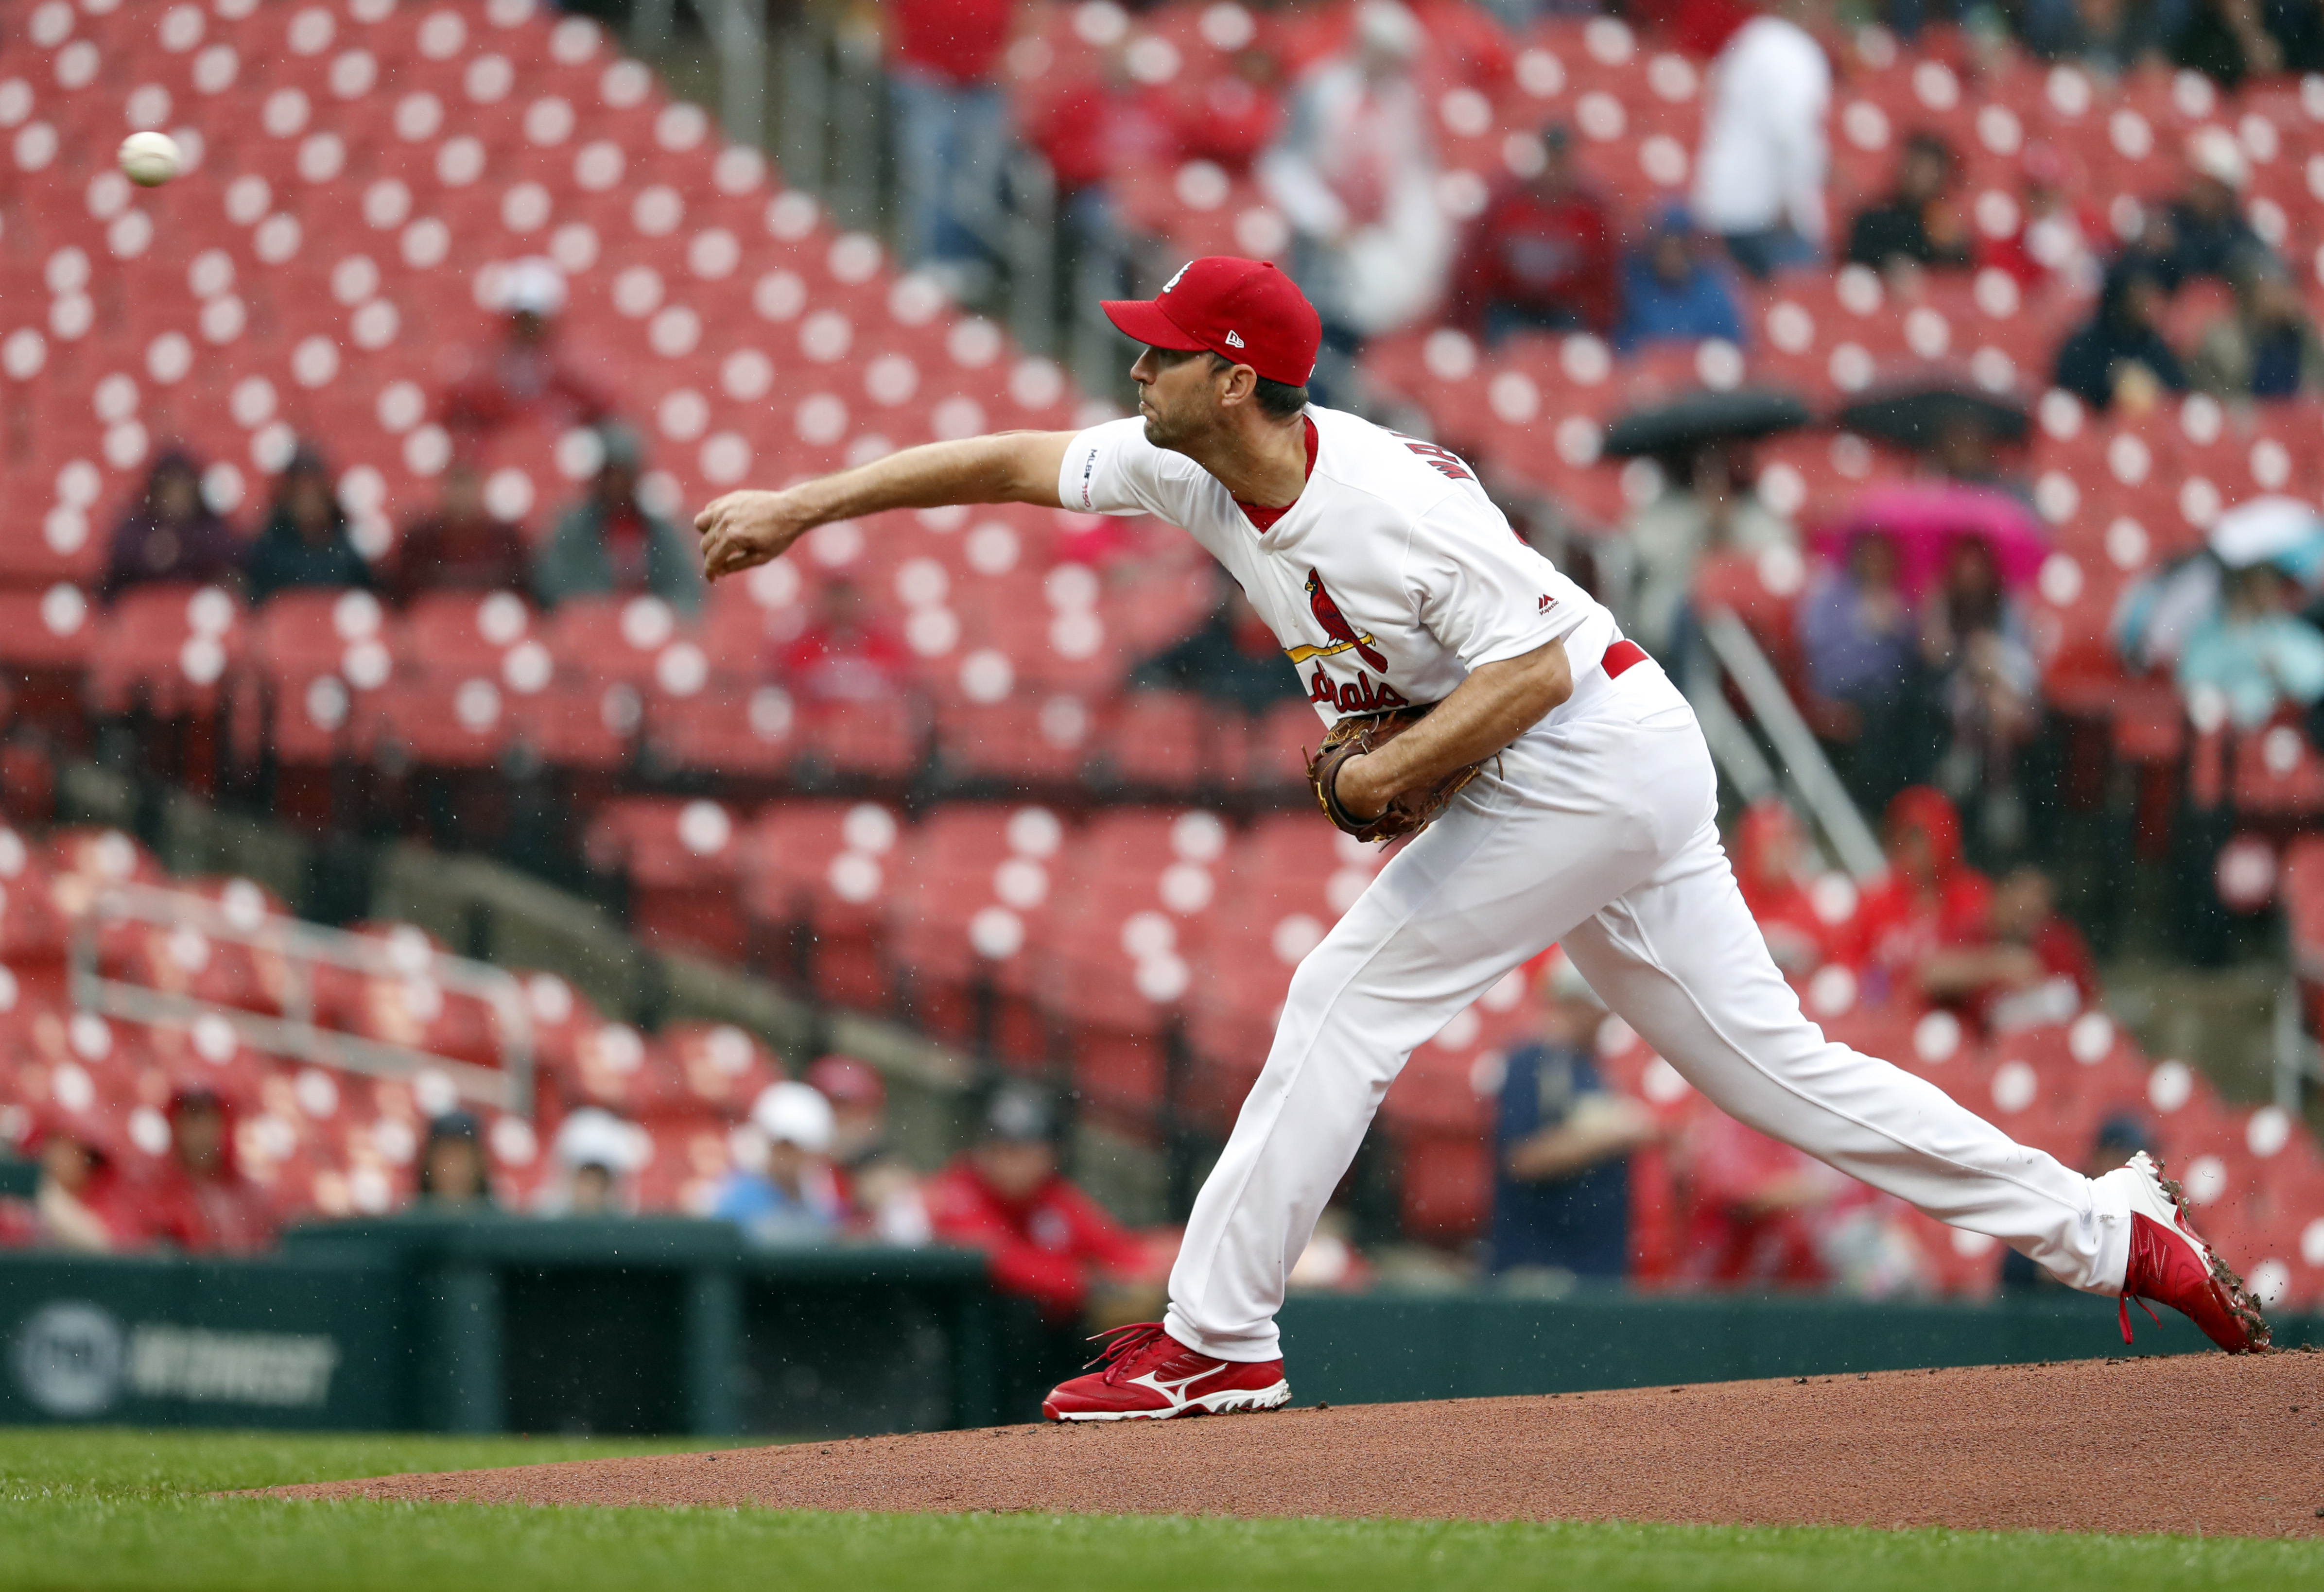 Wainwright gets 150th win as Cards sweep Brewers